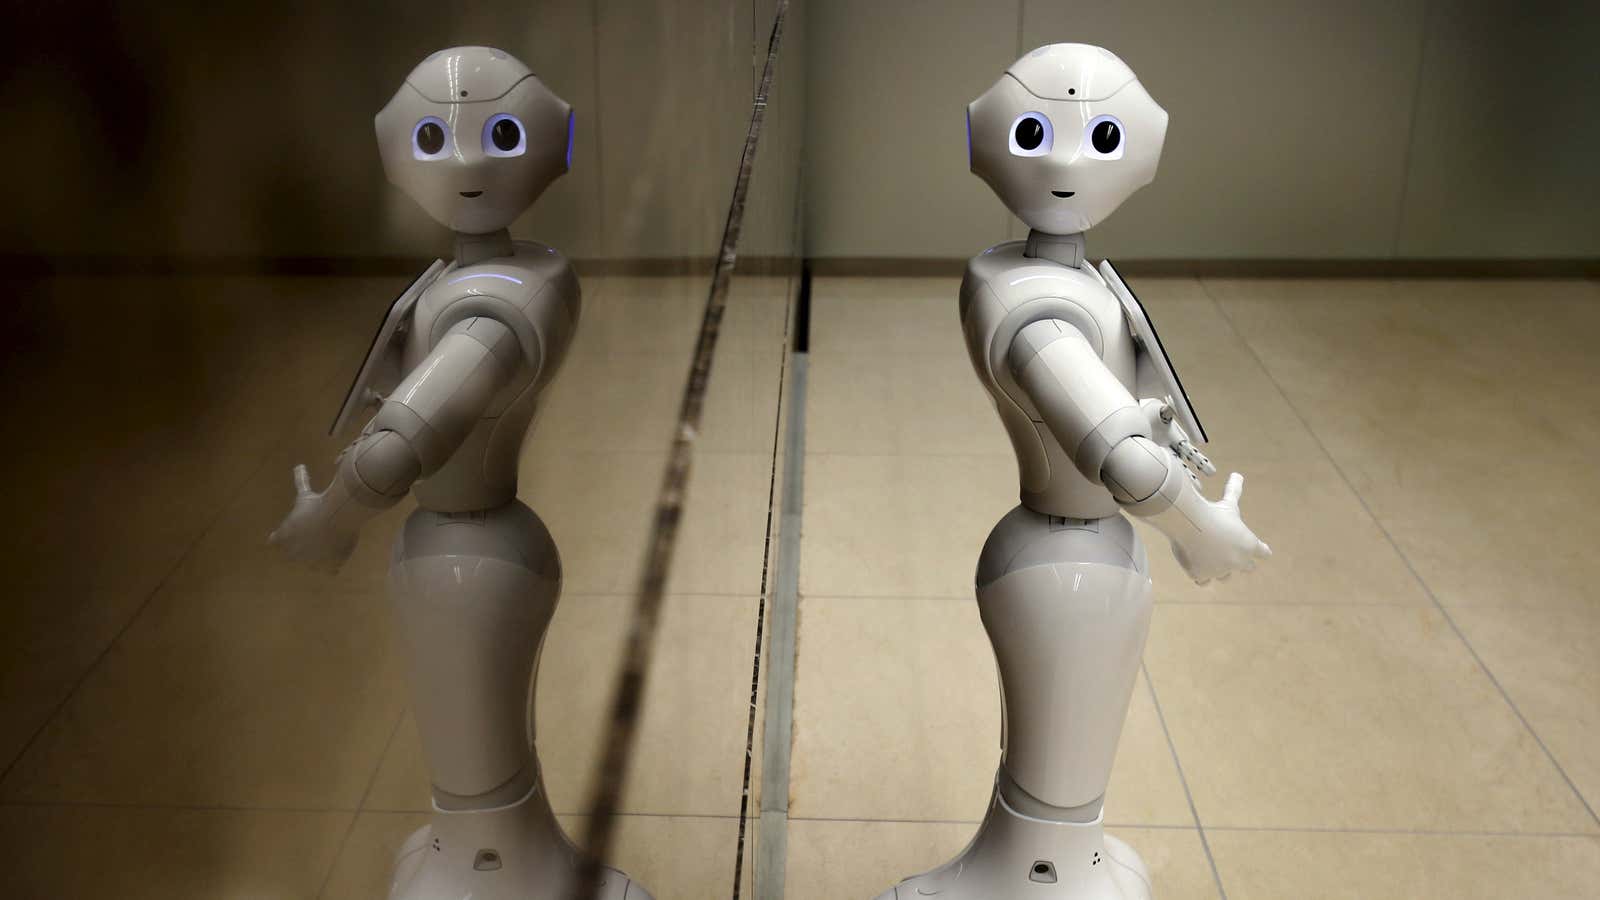 We haven’t created conscious robots yet, but some scientists believe it’s a matter of years.